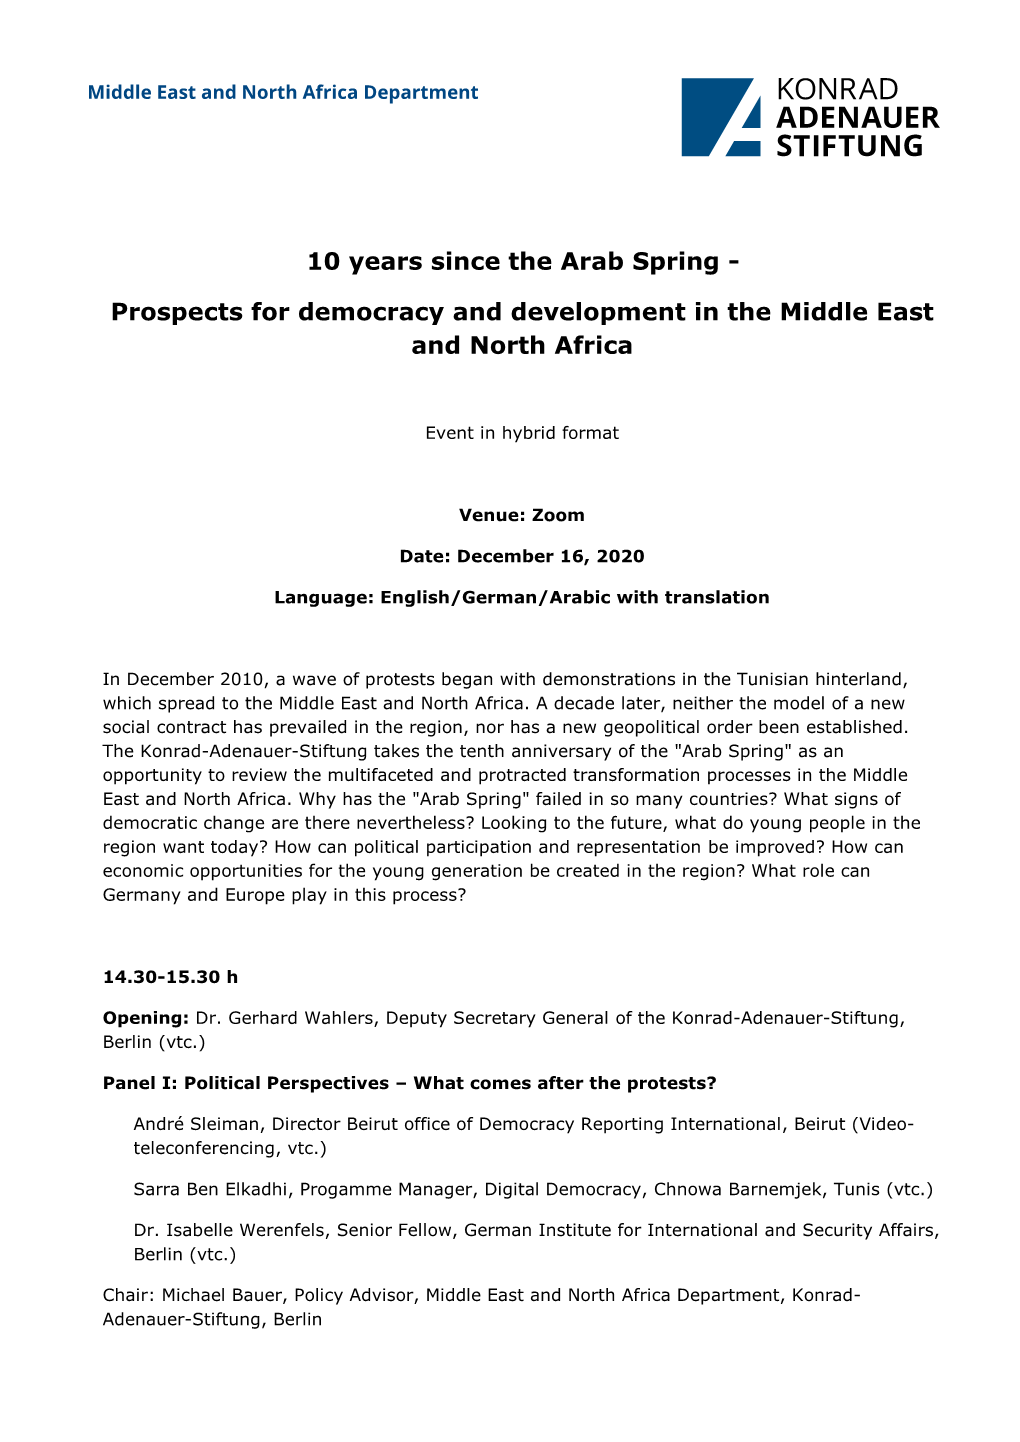 10 Years Since the Arab Spring